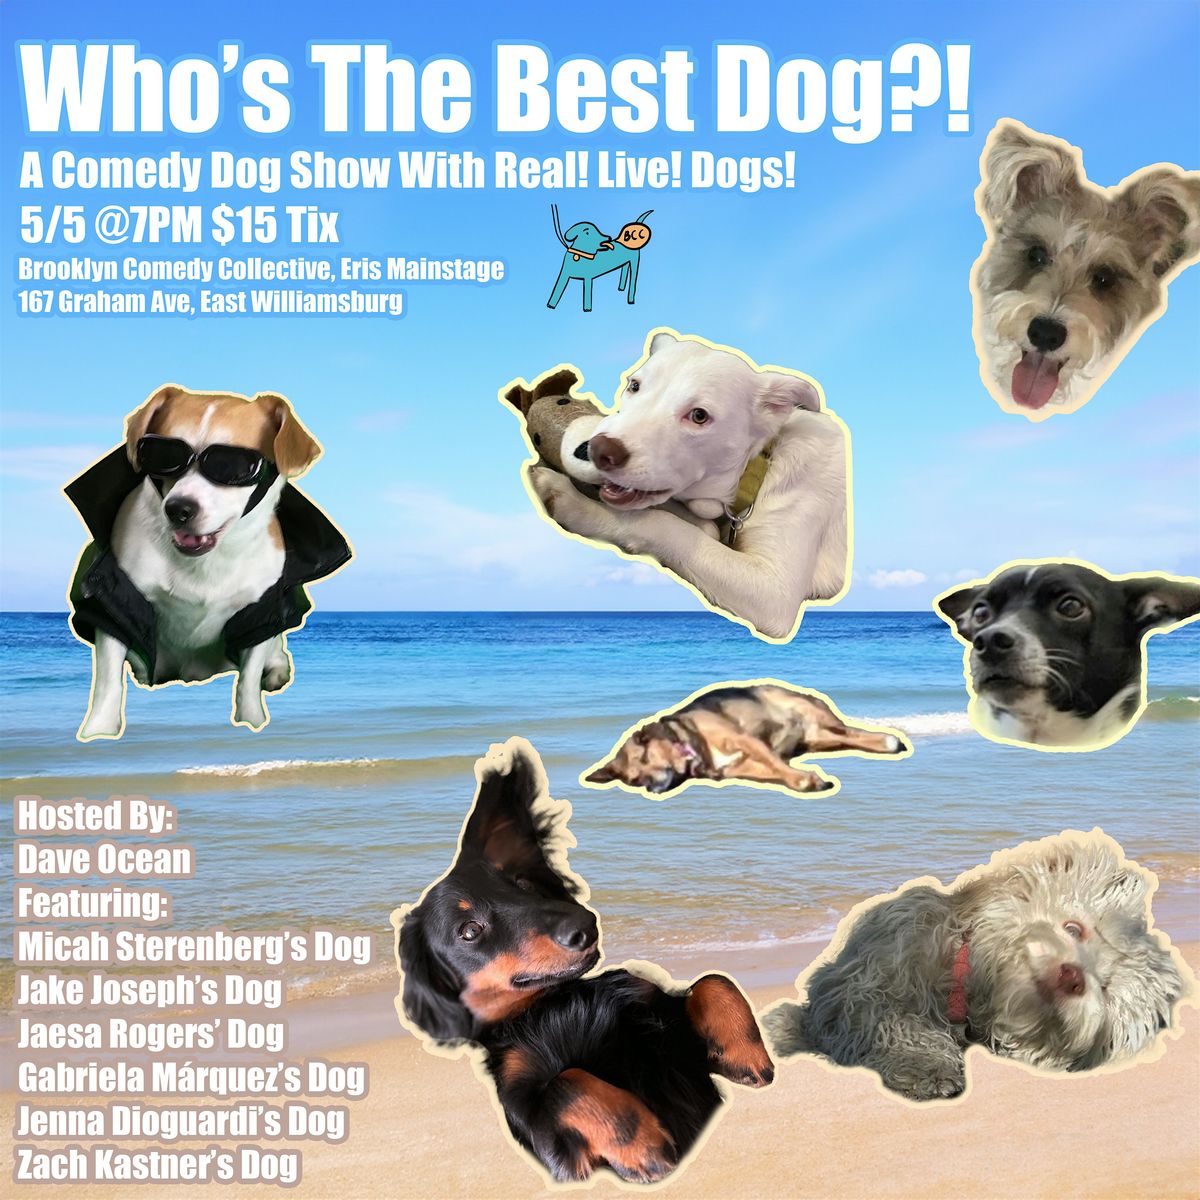 Who's the Best Dog?!: A Comedy Dog Show Featuring Real Live Dogs!